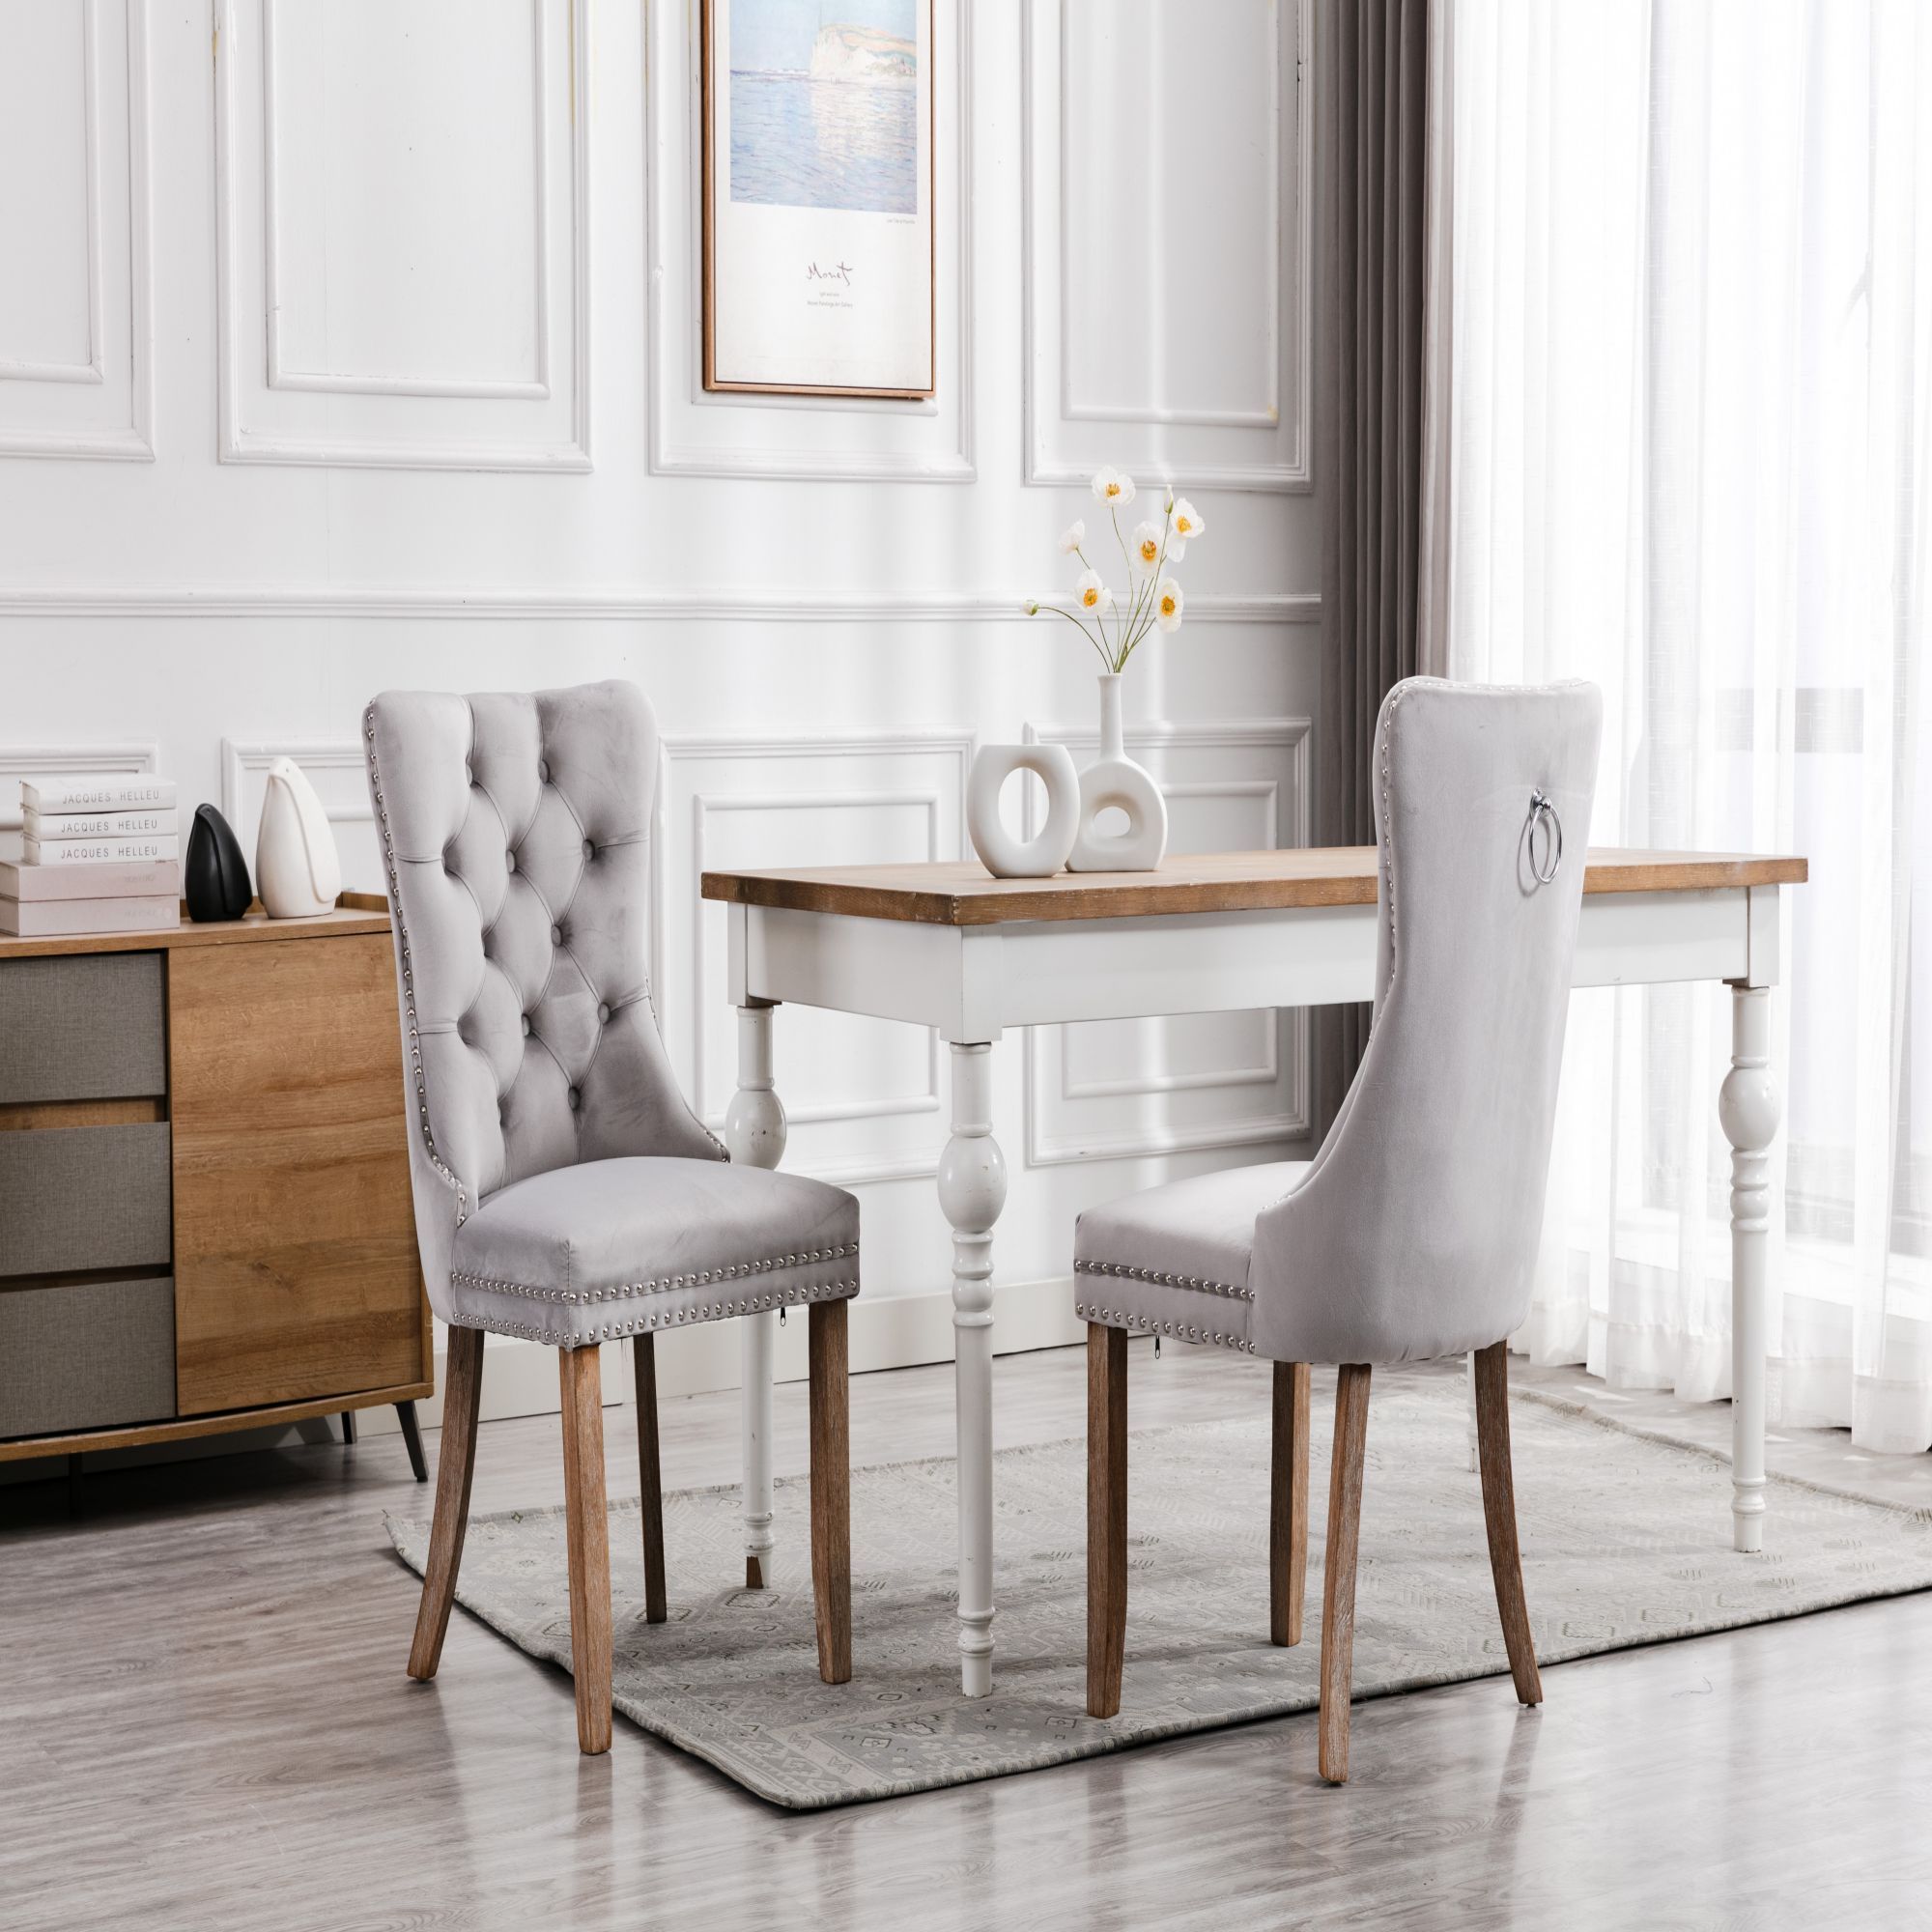 The Classic Chairs Crafted with Solid Wood and Wooden Frame-CASAINC